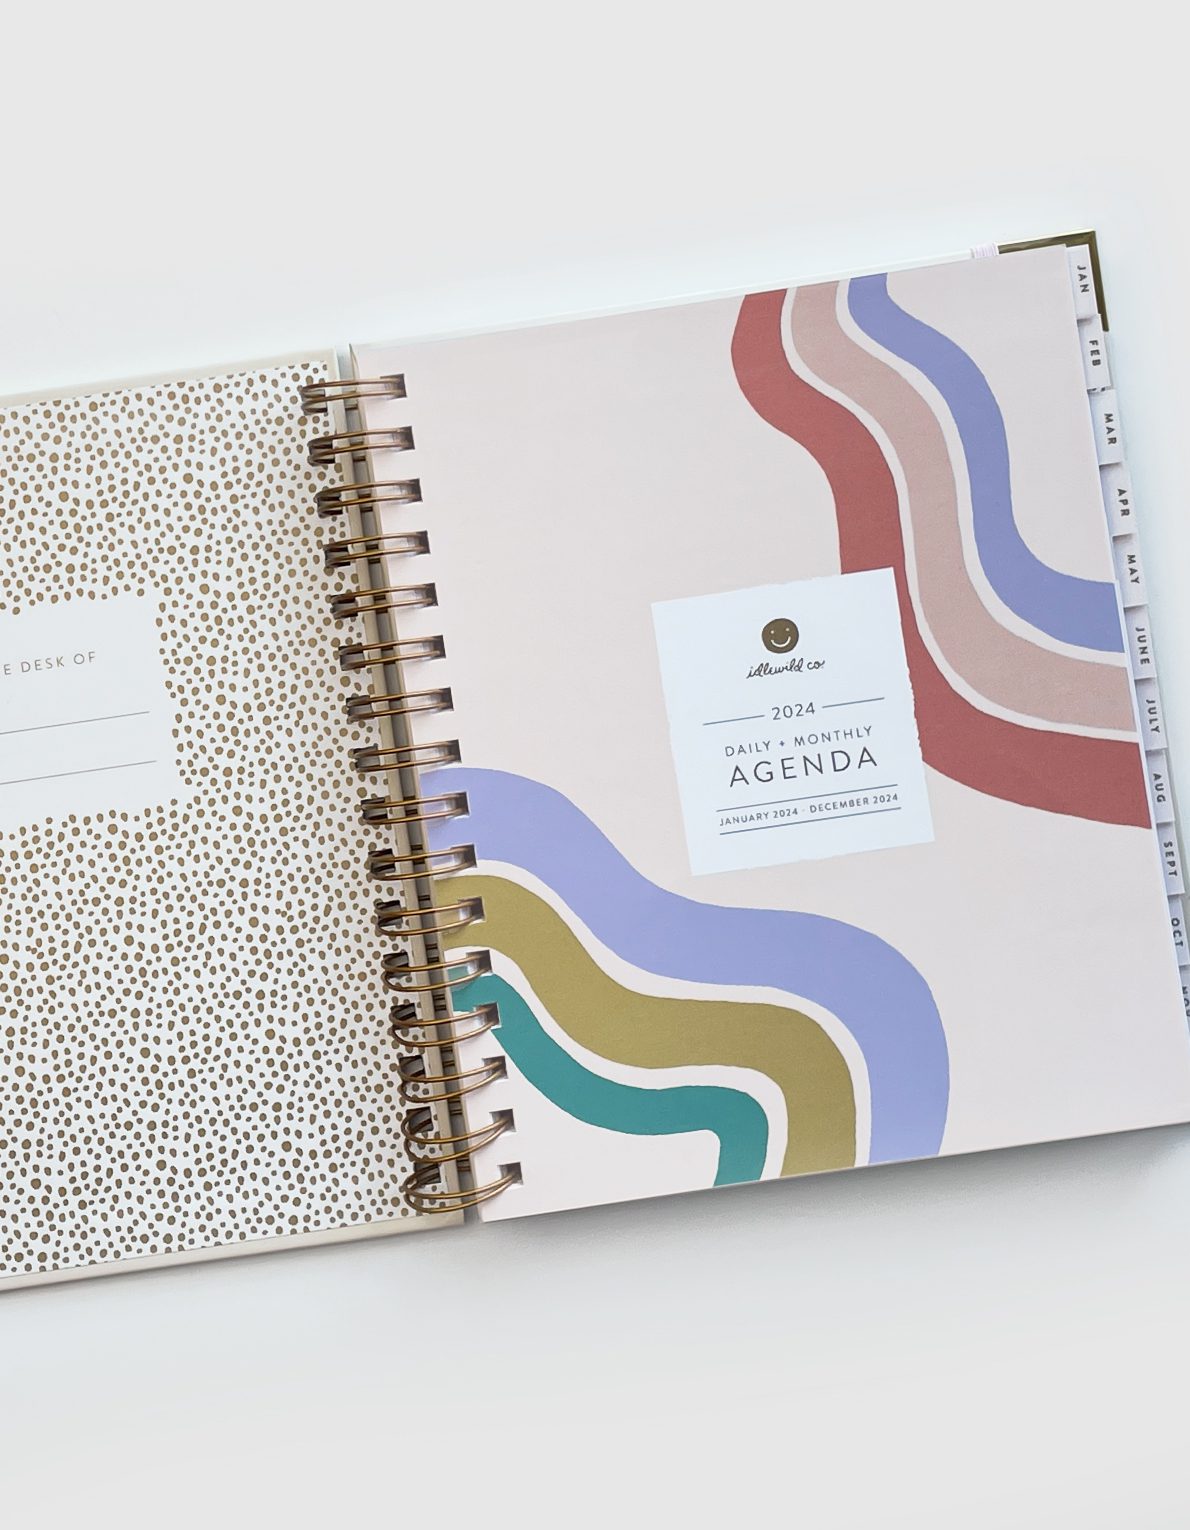 Gonna Be a Great Year Planner, 2024 – Idlewild Co.